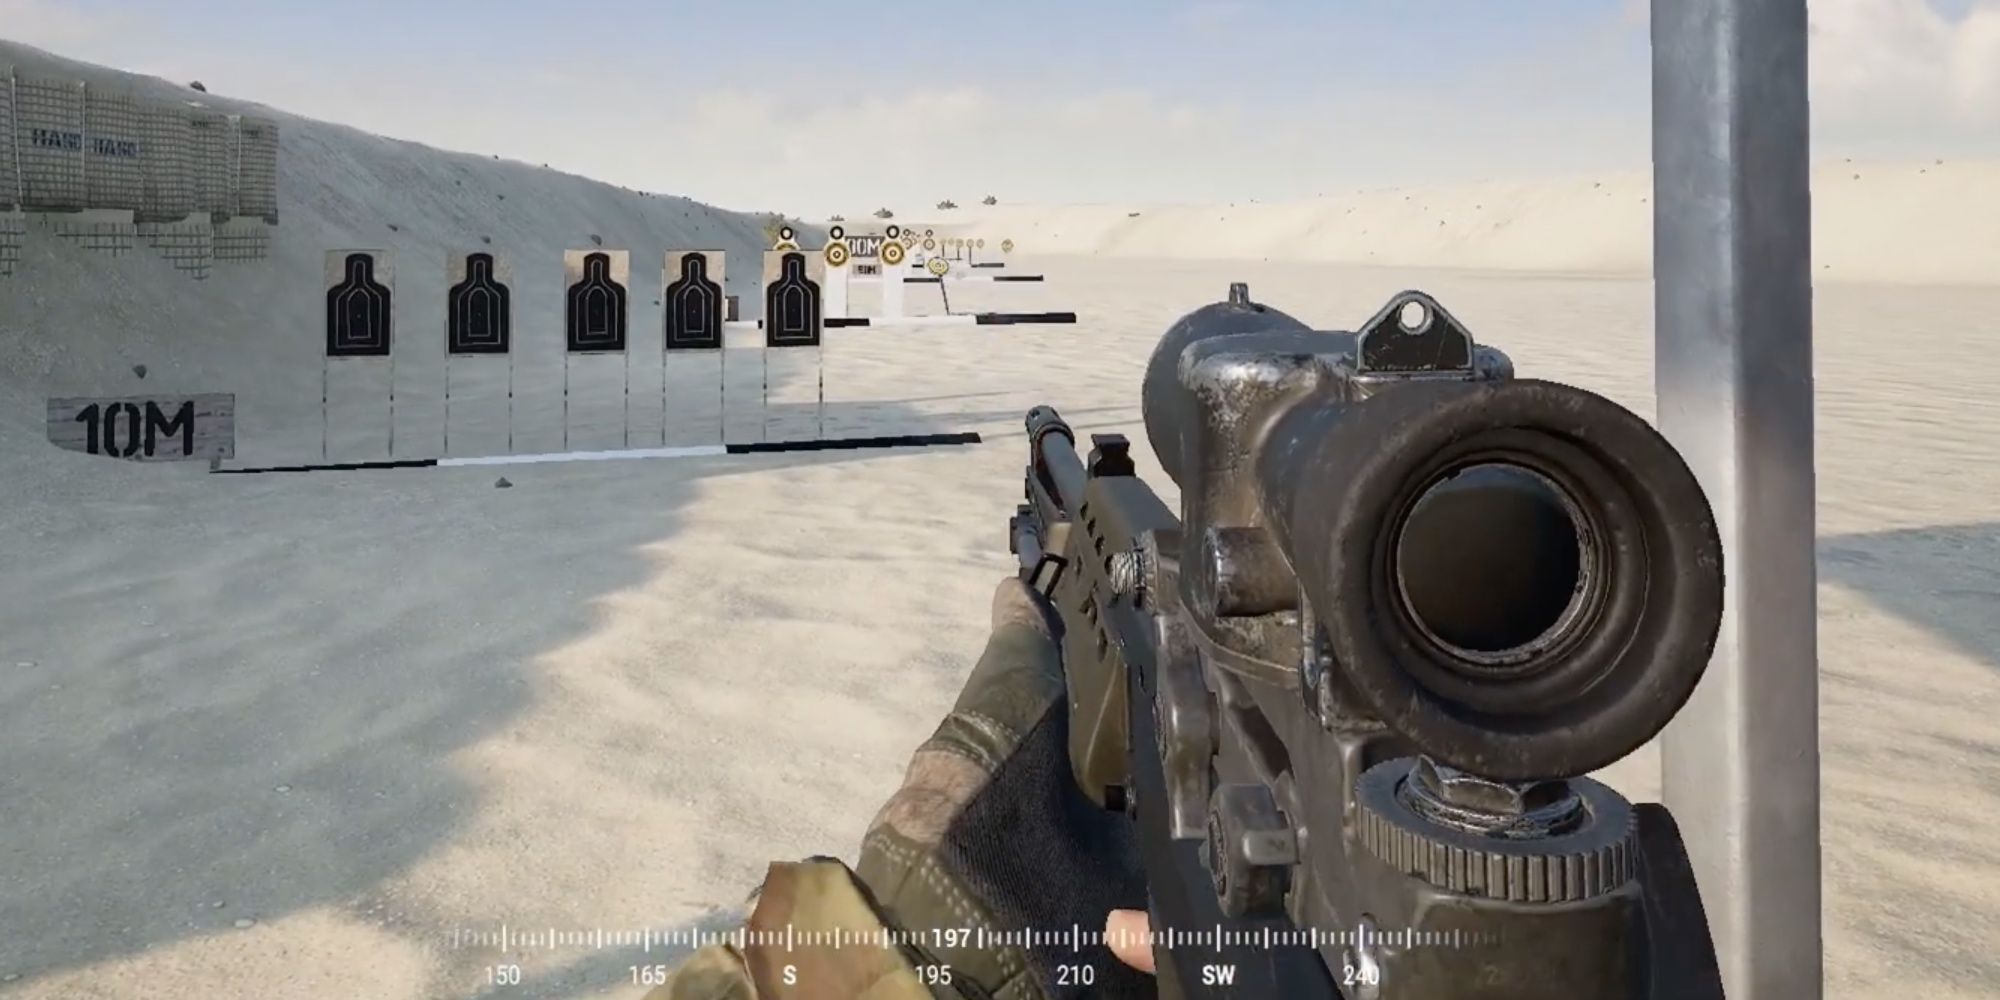 Player slays an enemy at long-range using L86A2